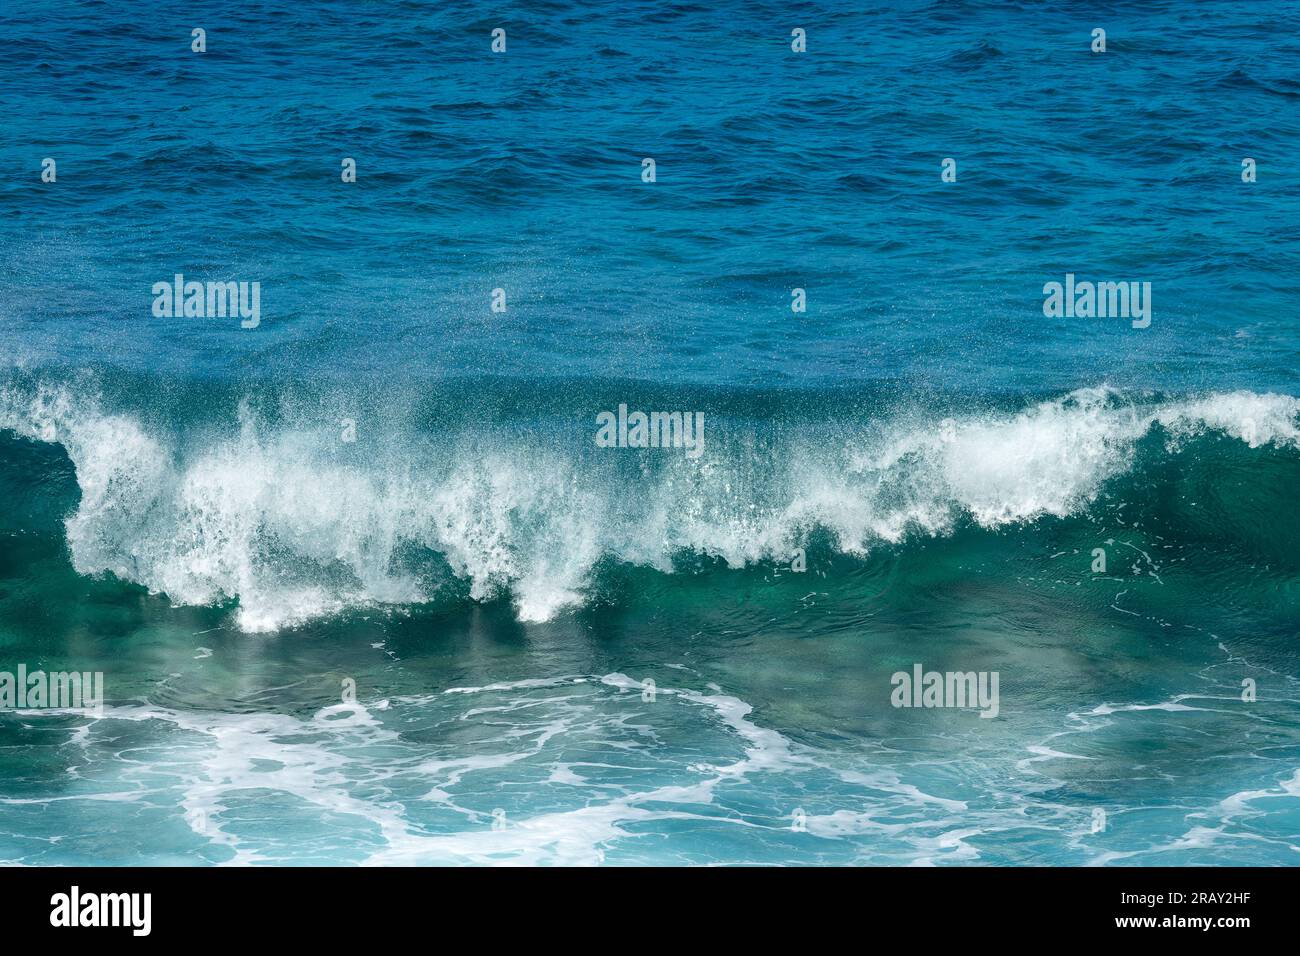 Front view of a crashing wave. Blue clear transparent water splash, ocean background. Stock Photo